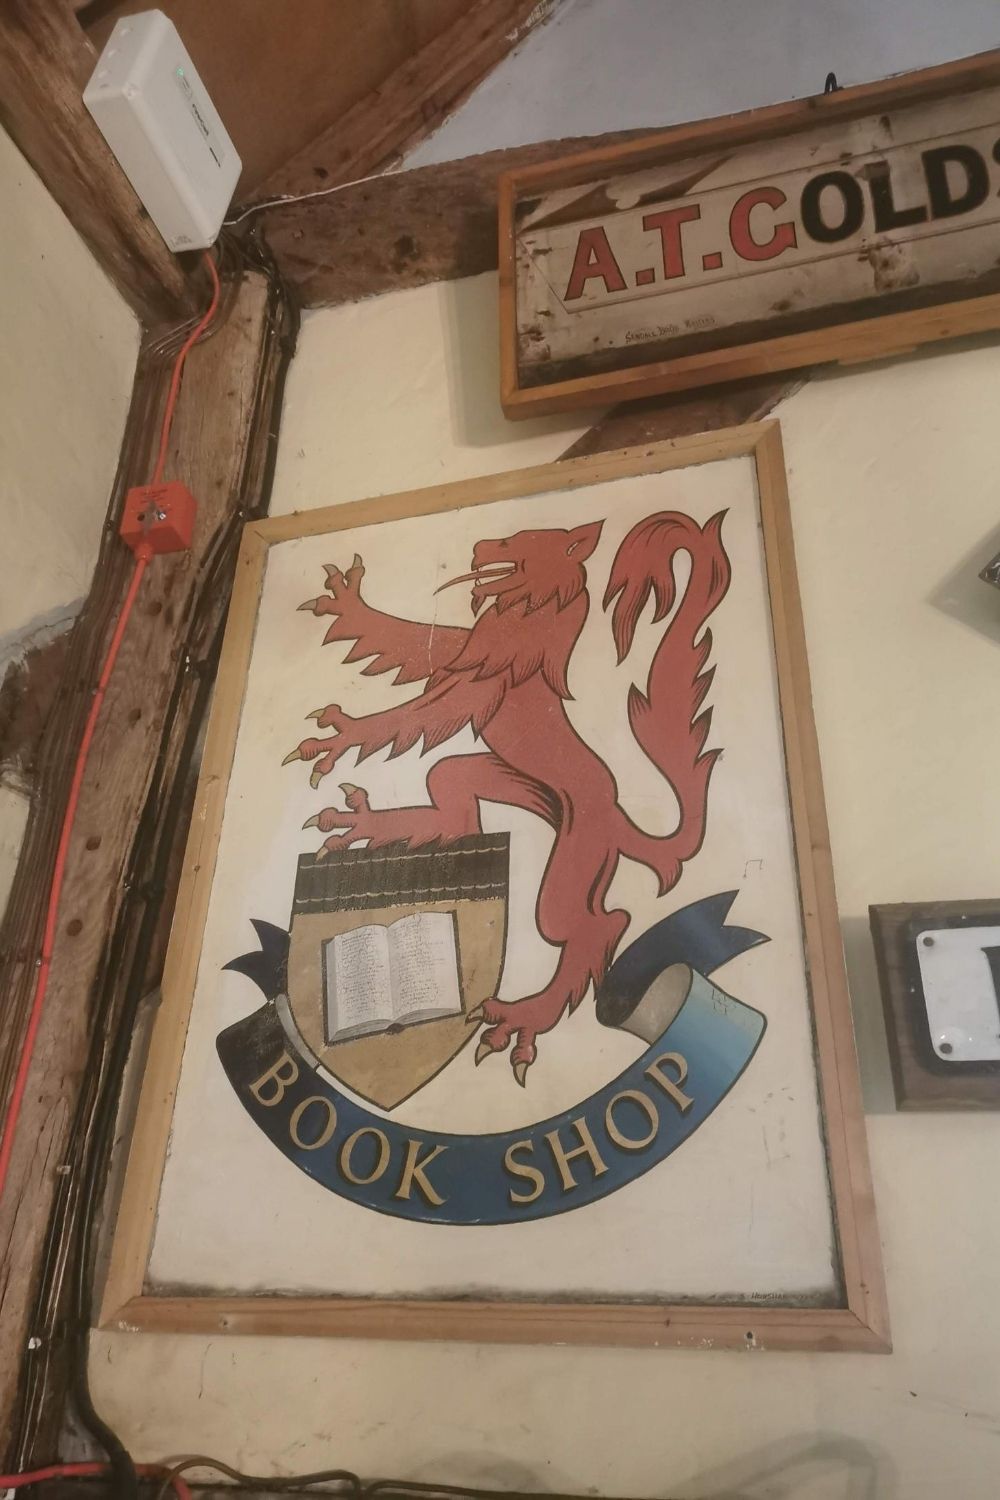 Sign from a Red Lion book shop